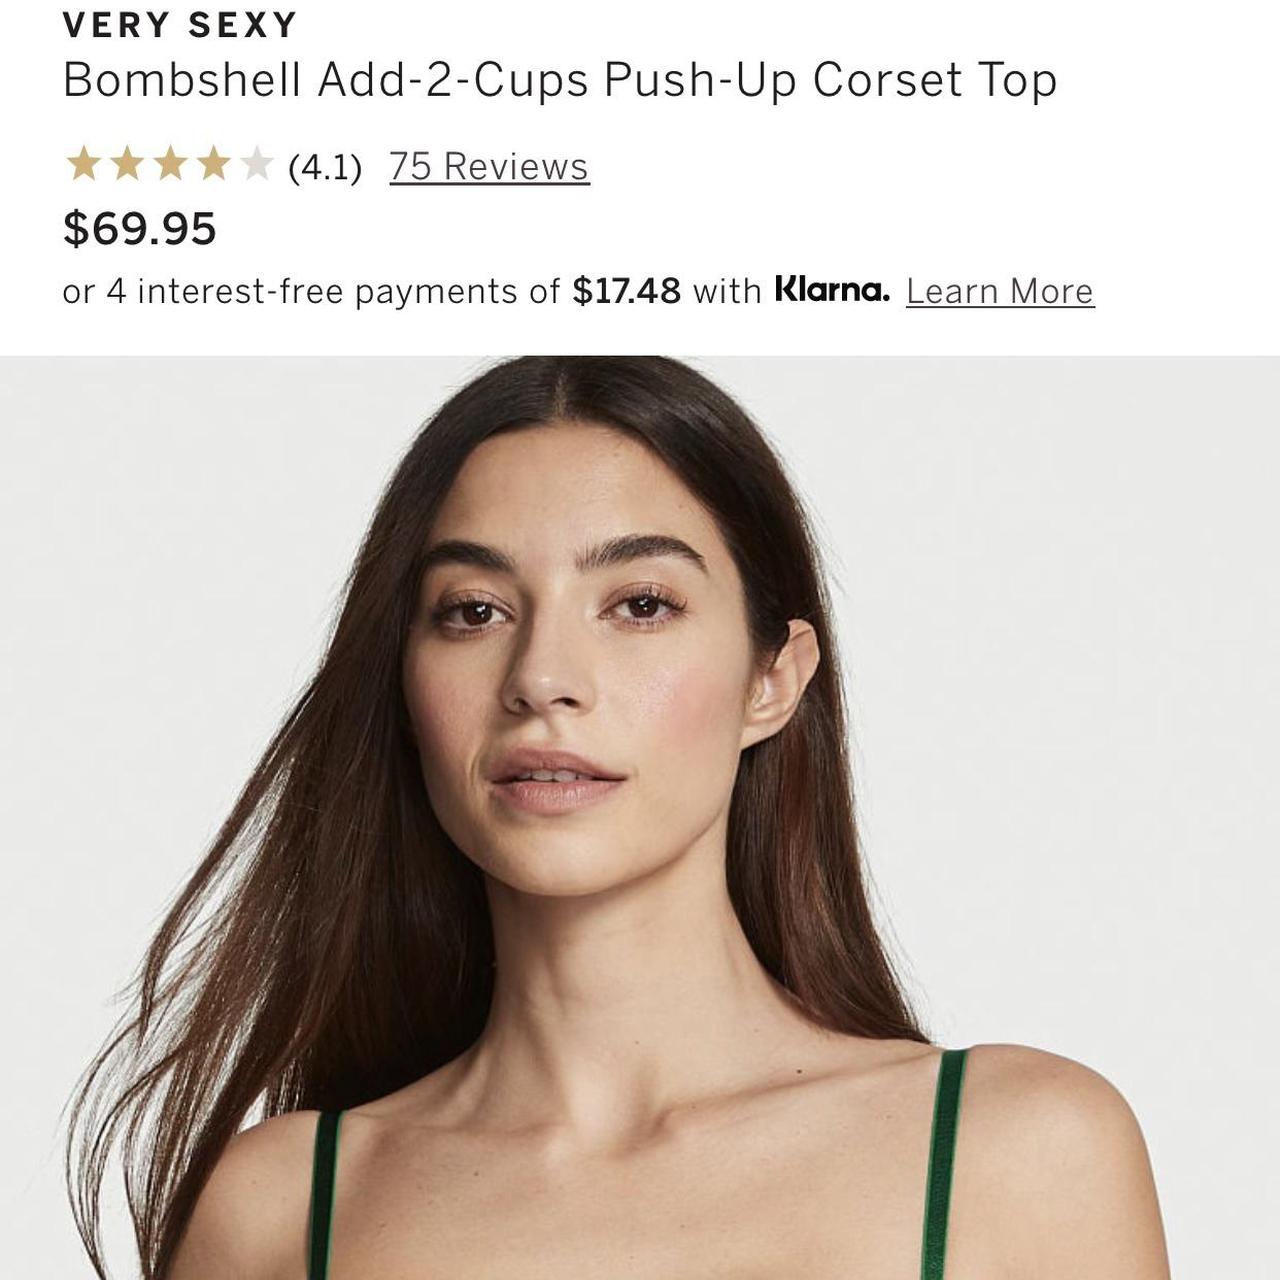 Very Sexy Bombshell Add-2-Cups Push-Up Corset Top